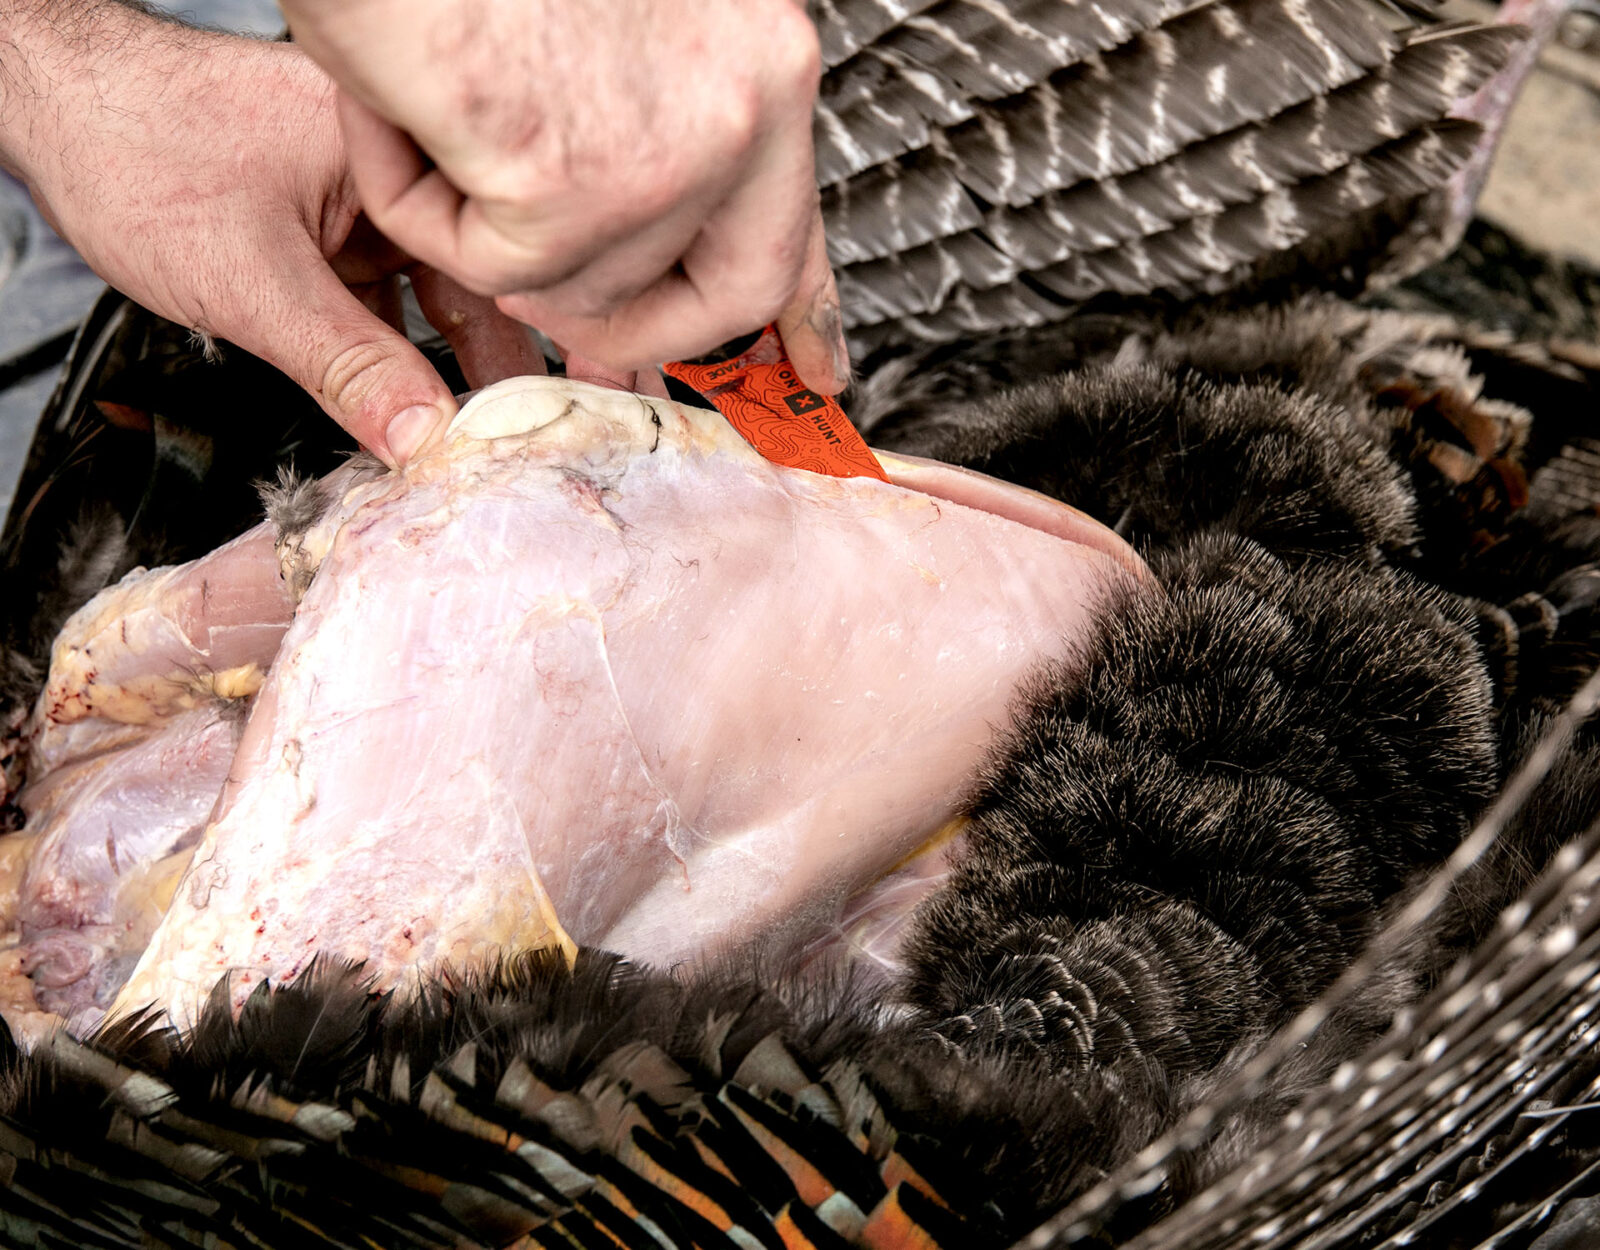 Cleaning a wild turkey guide step 4 - remove the lobe 